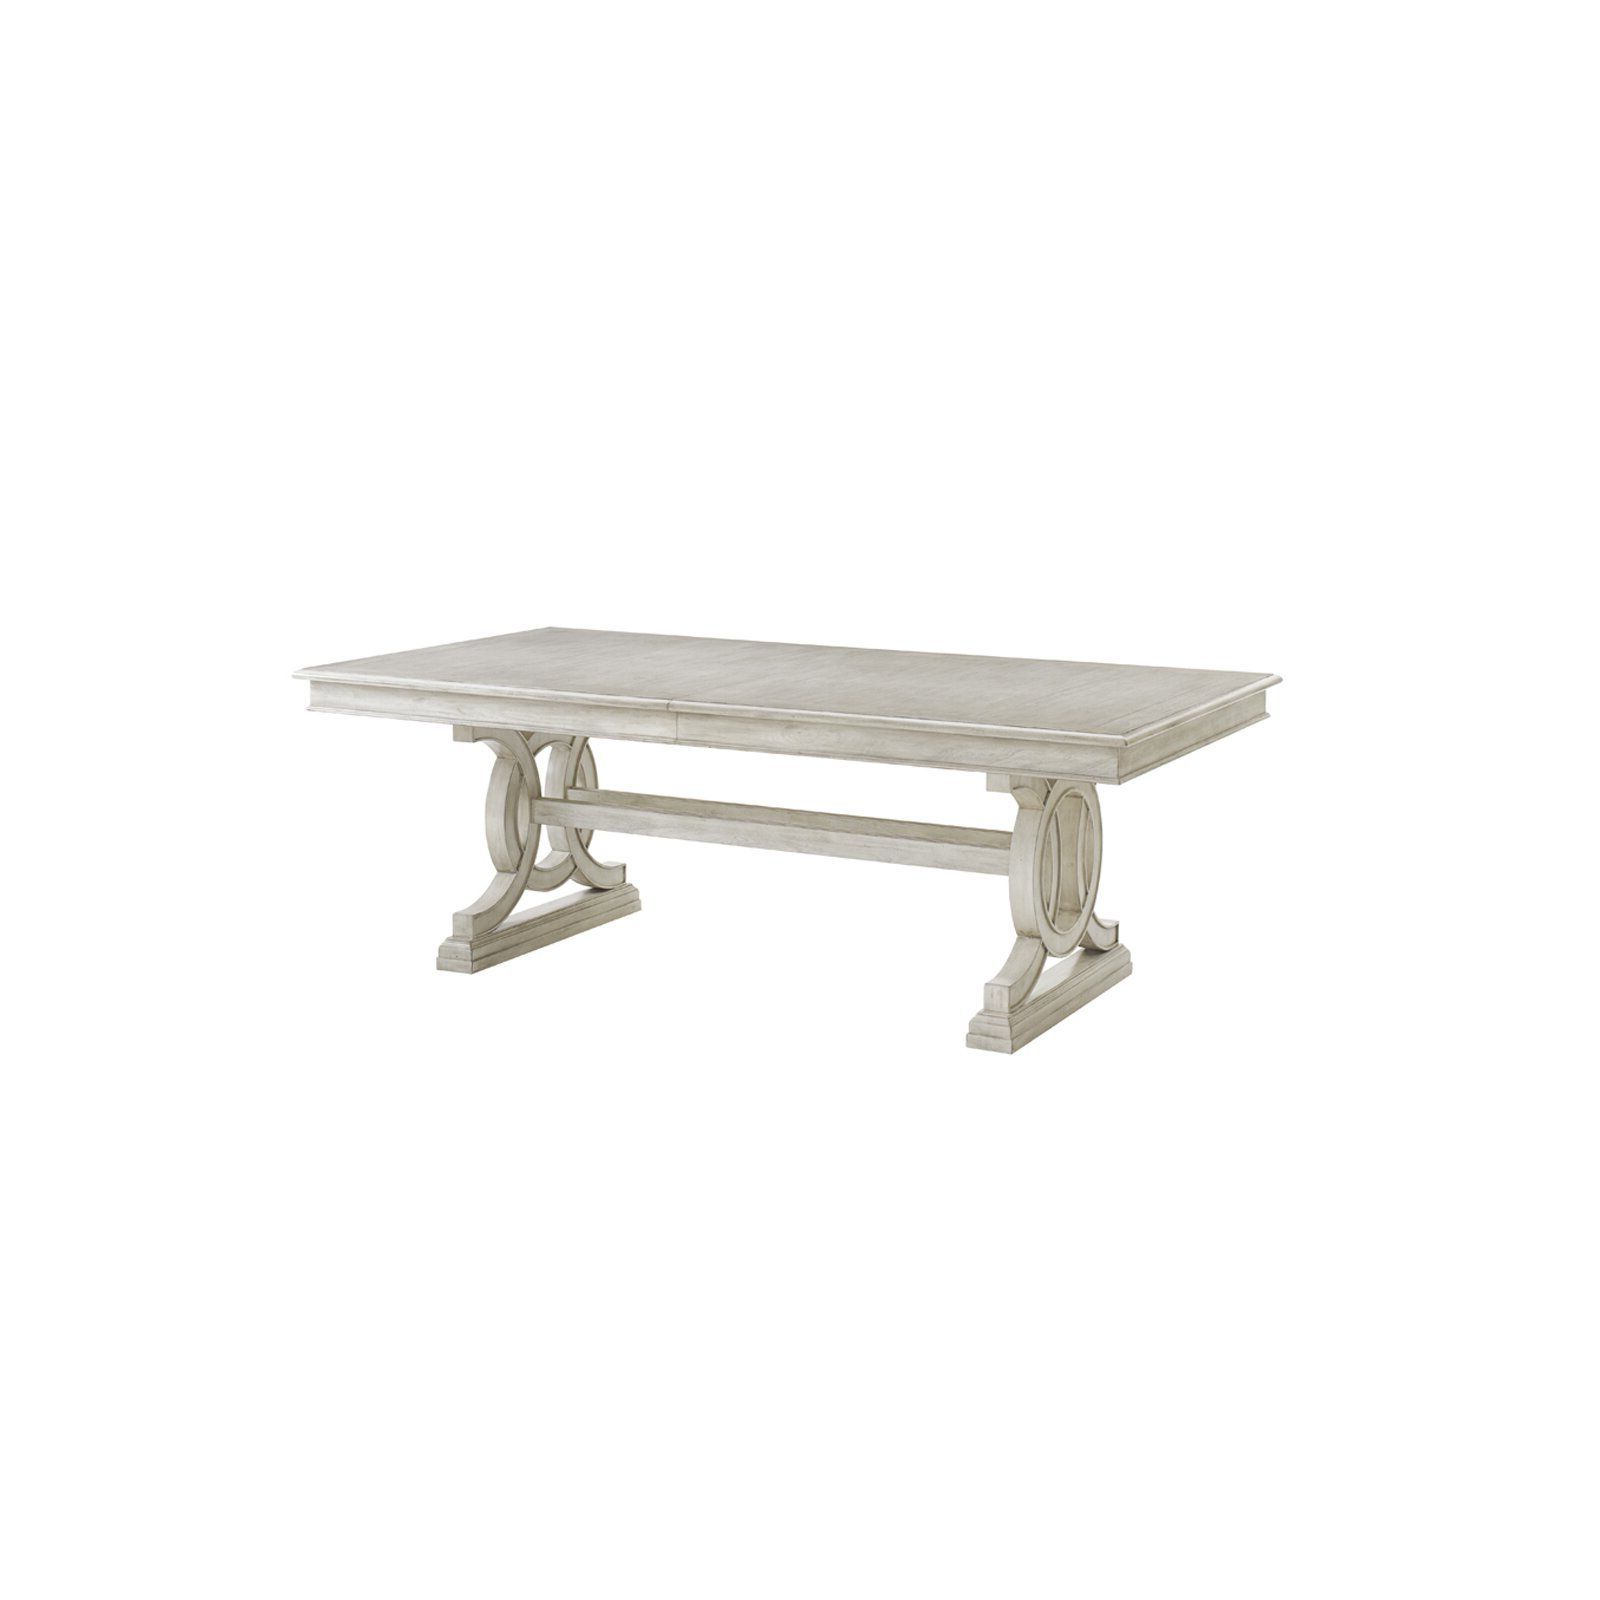 Most Popular Lexington Oyster Bay Montauk Extendable Dining Table For Montauk  (View 3 of 20)